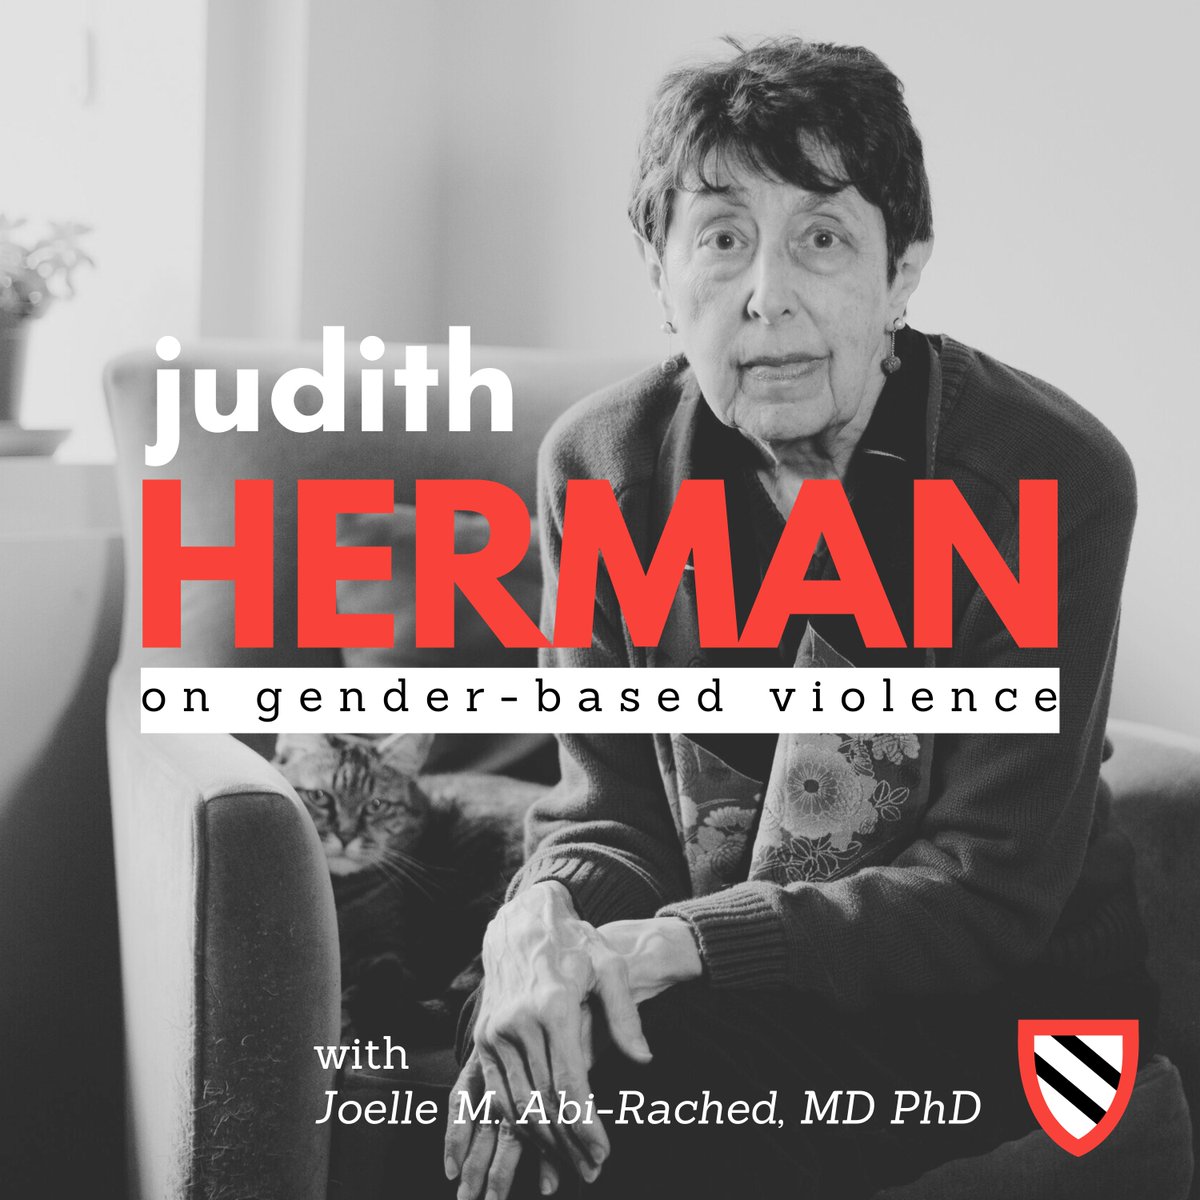 The first episode of 'Mental Health in Crisis,' a podcast I've been working on with @jabirached_ at @RadInstitute is out on all platforms now! We spoke to Judith Herman, the leading expert in sexual violence and trauma, about the history of womens' mental health and healing.